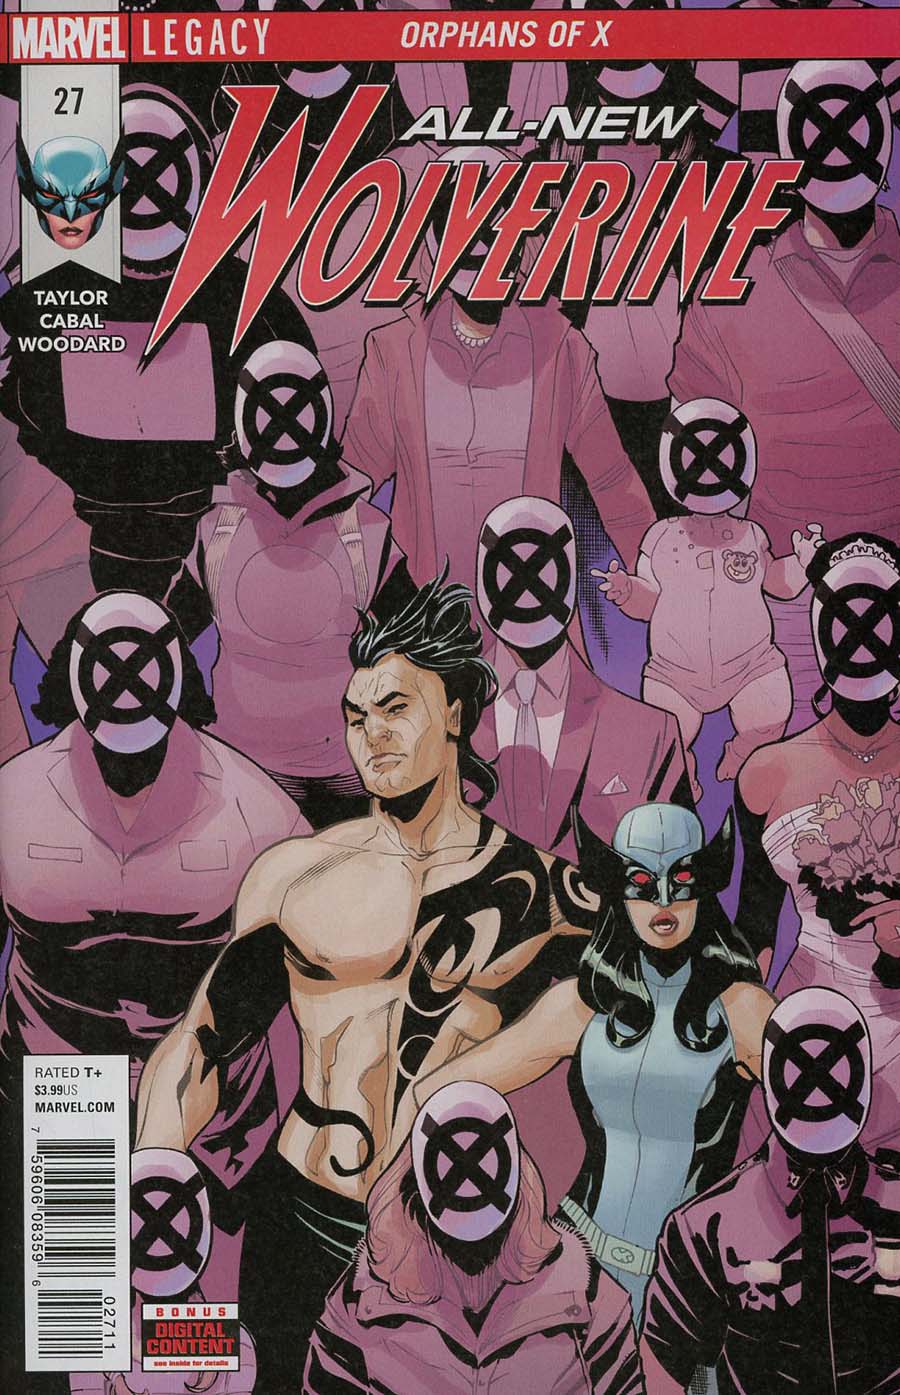 All-New Wolverine #27 (Marvel Legacy Tie-In)